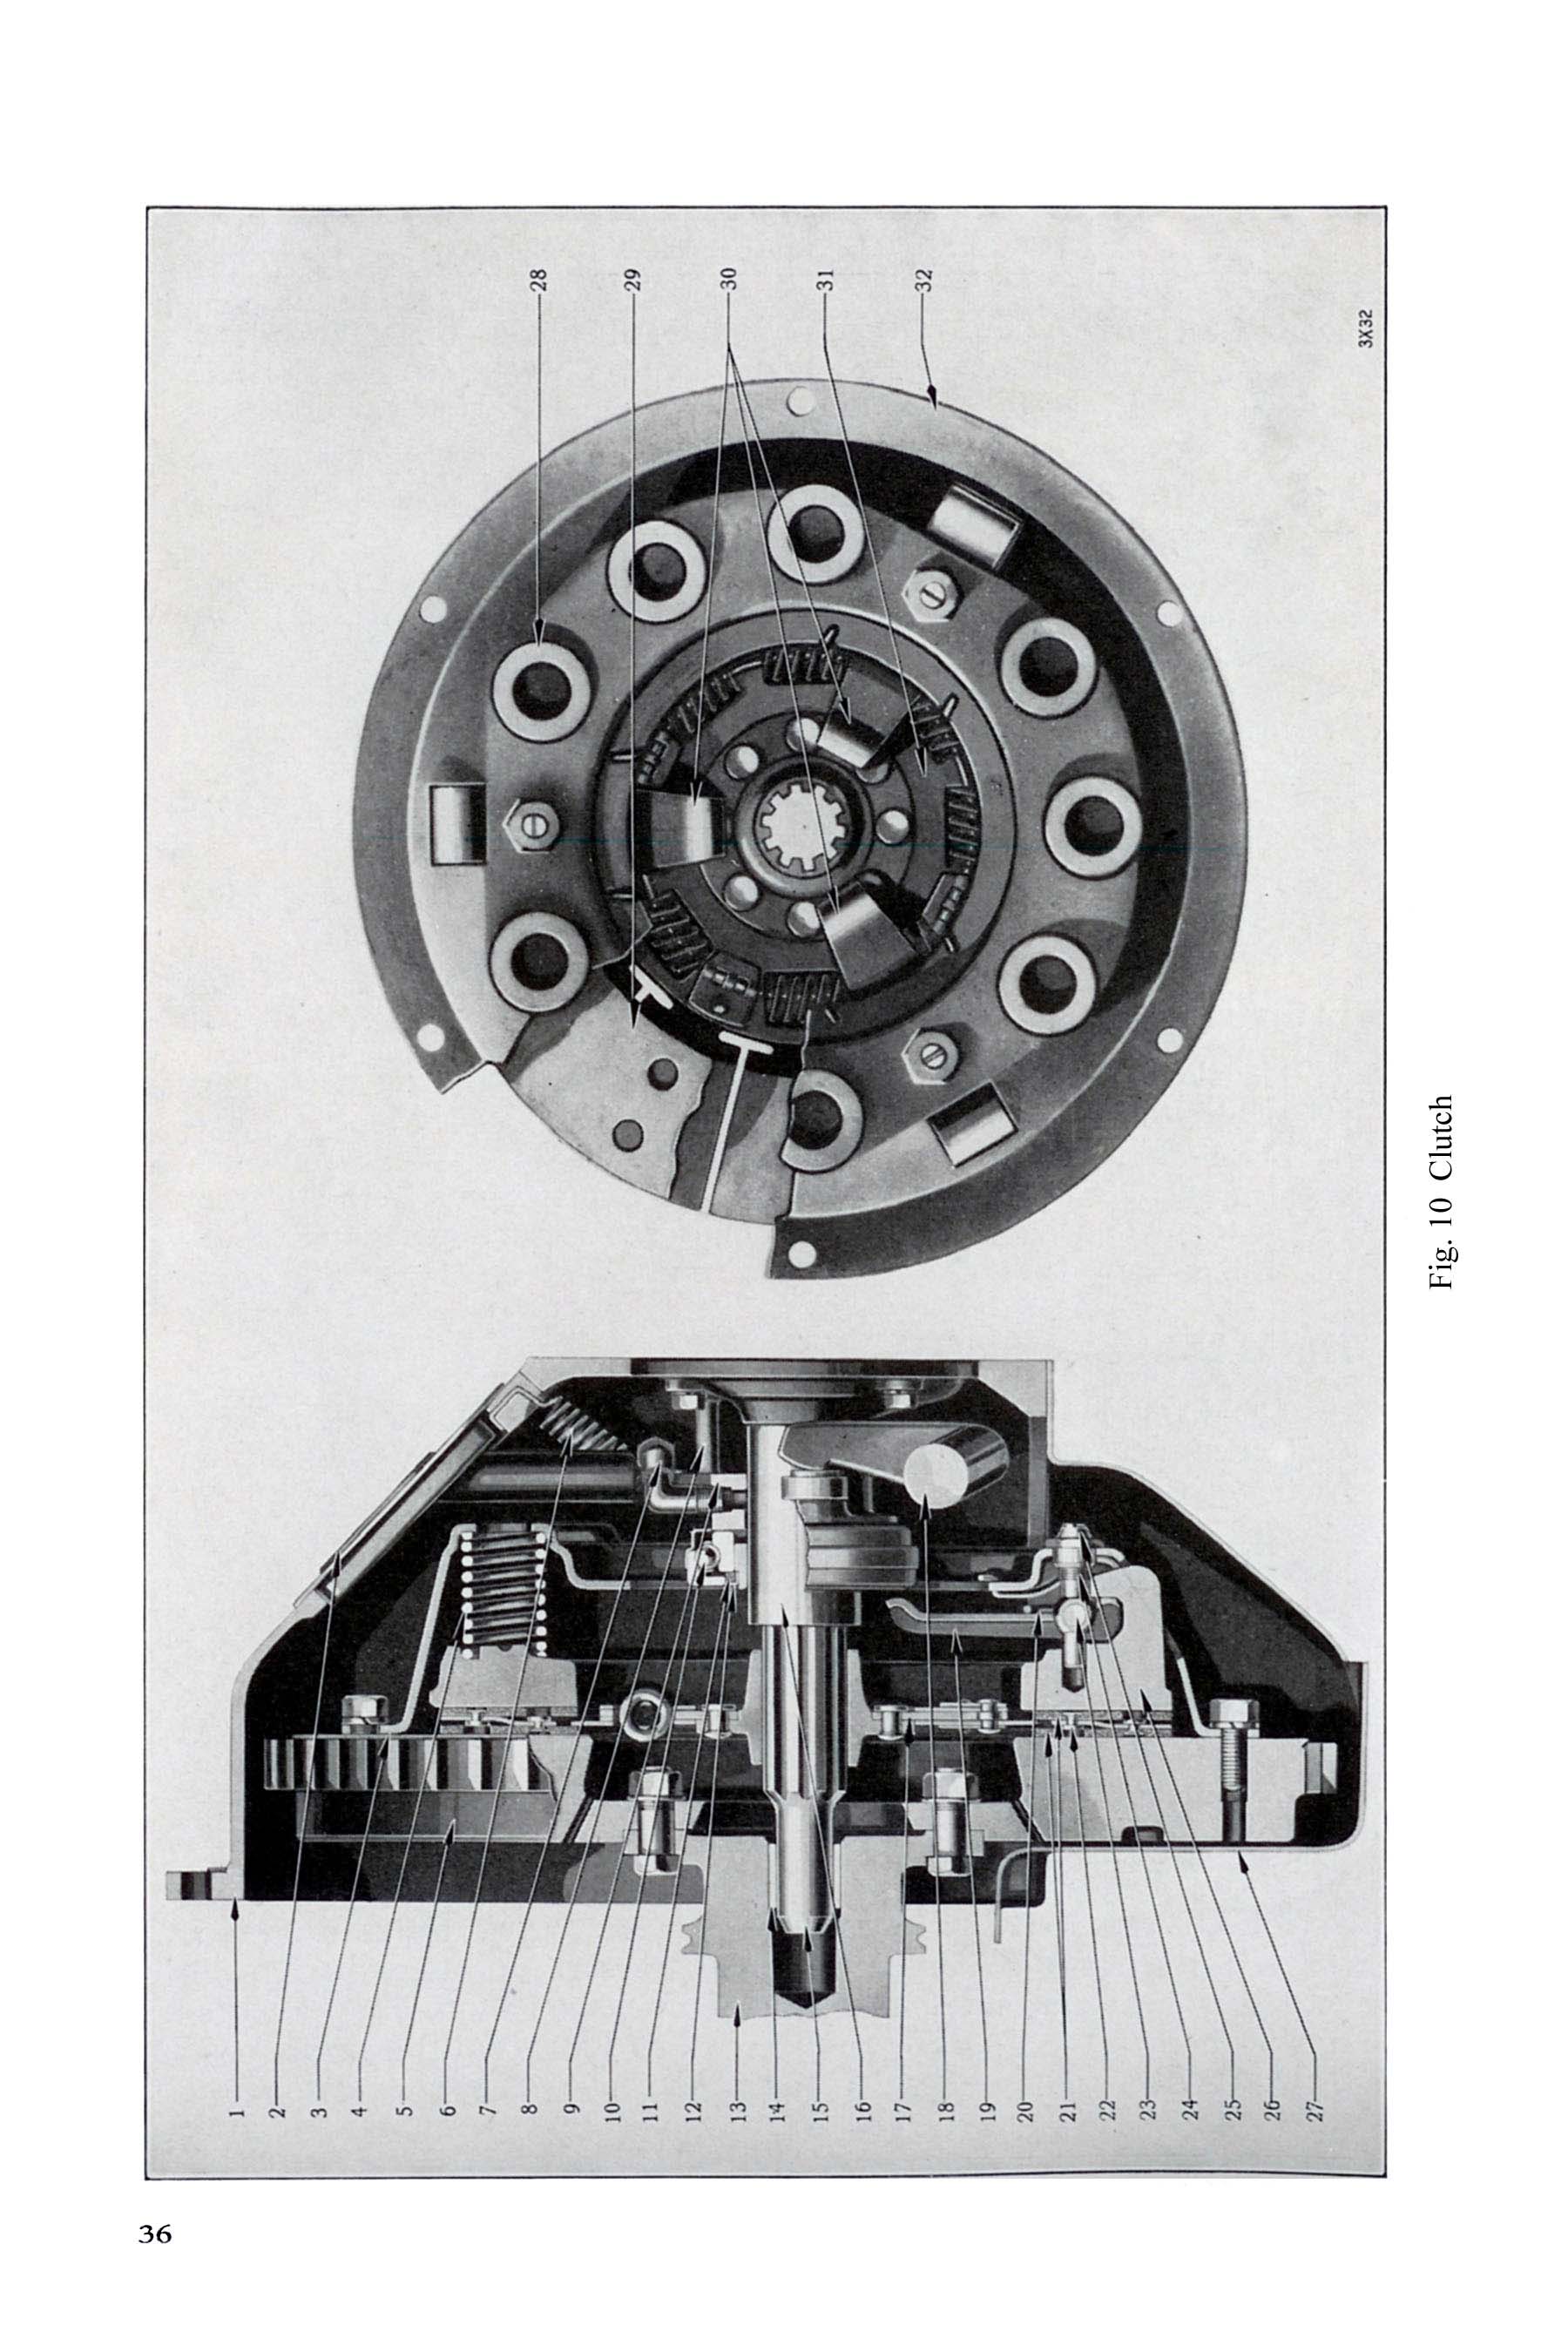 1933 Imperial Instruction Book-036